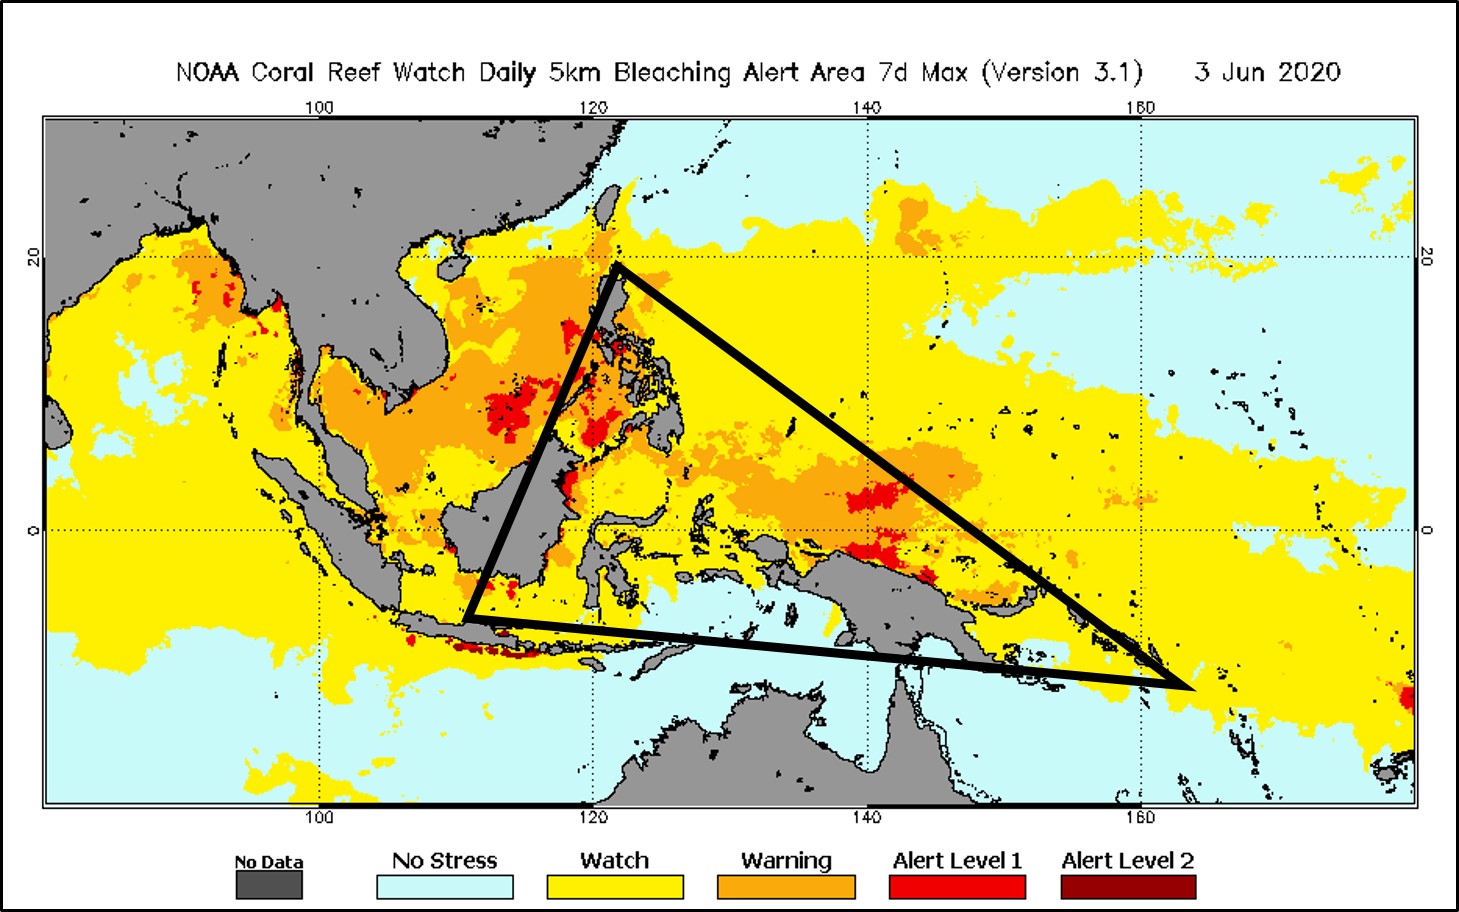 Coral Reef Watch bleaching alert on April 30, 2020 for the Coral Triangle, with the area outlined.